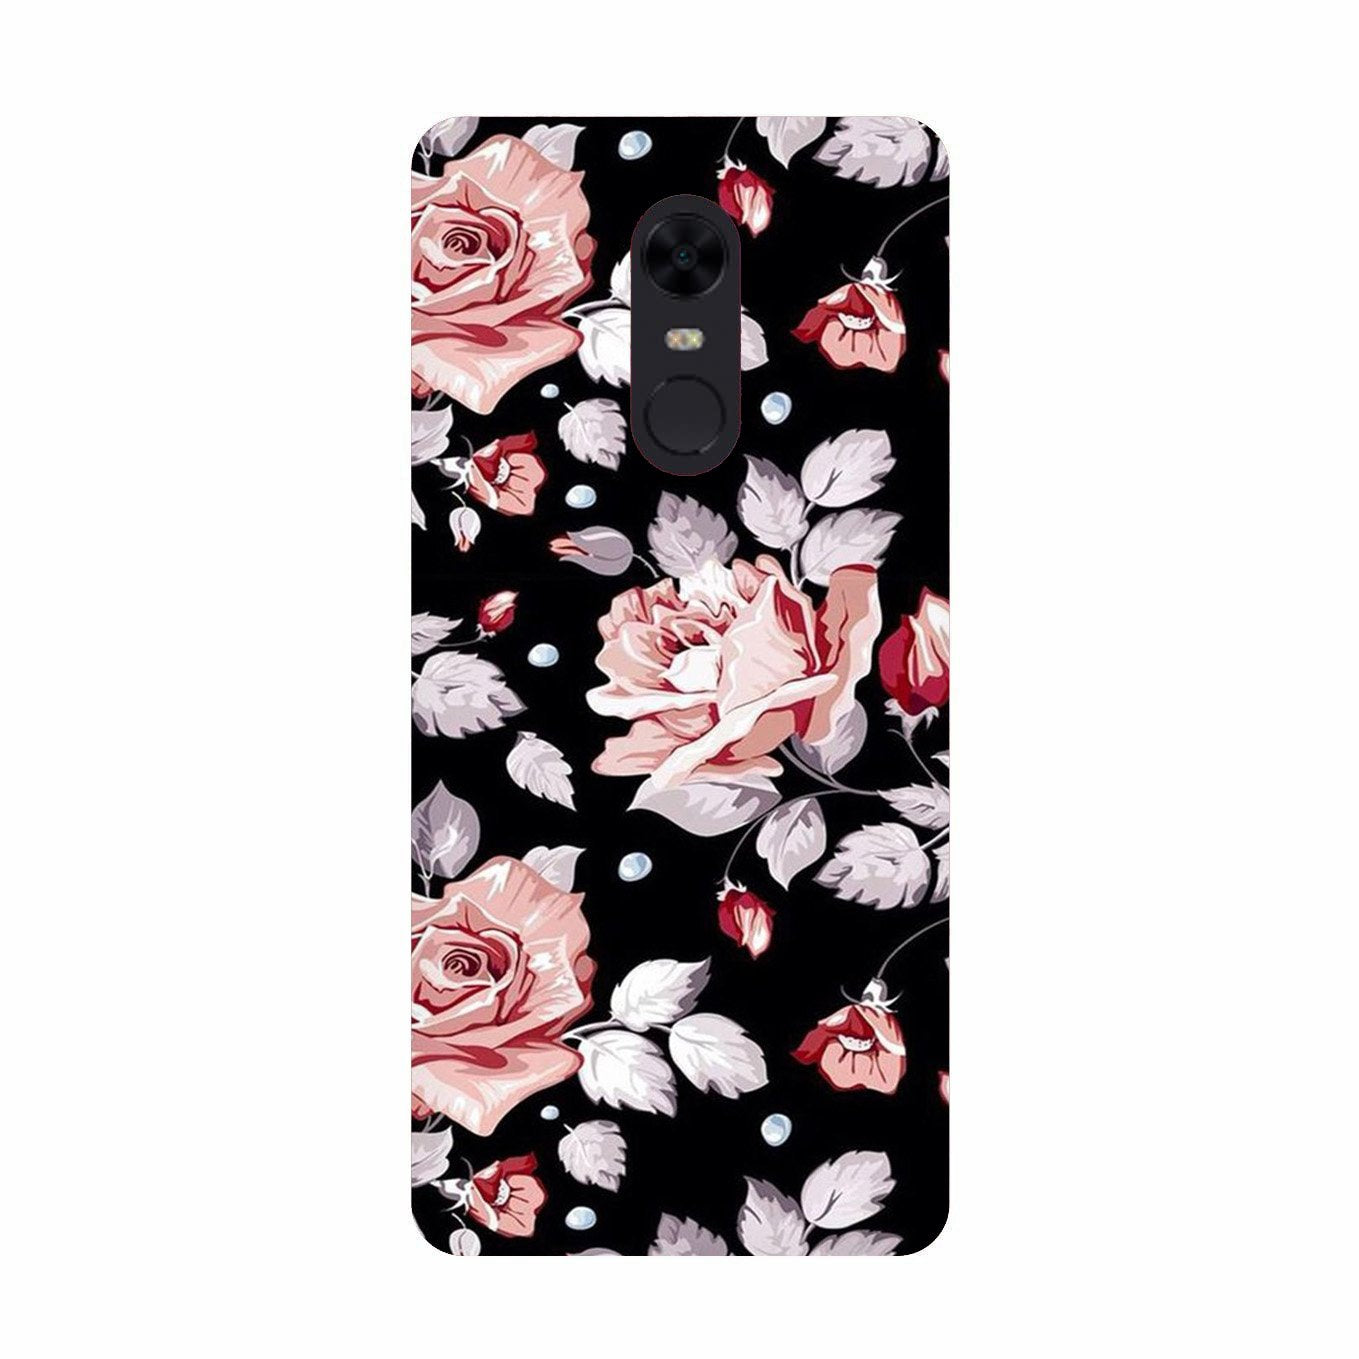 Pink rose Case for Redmi 5